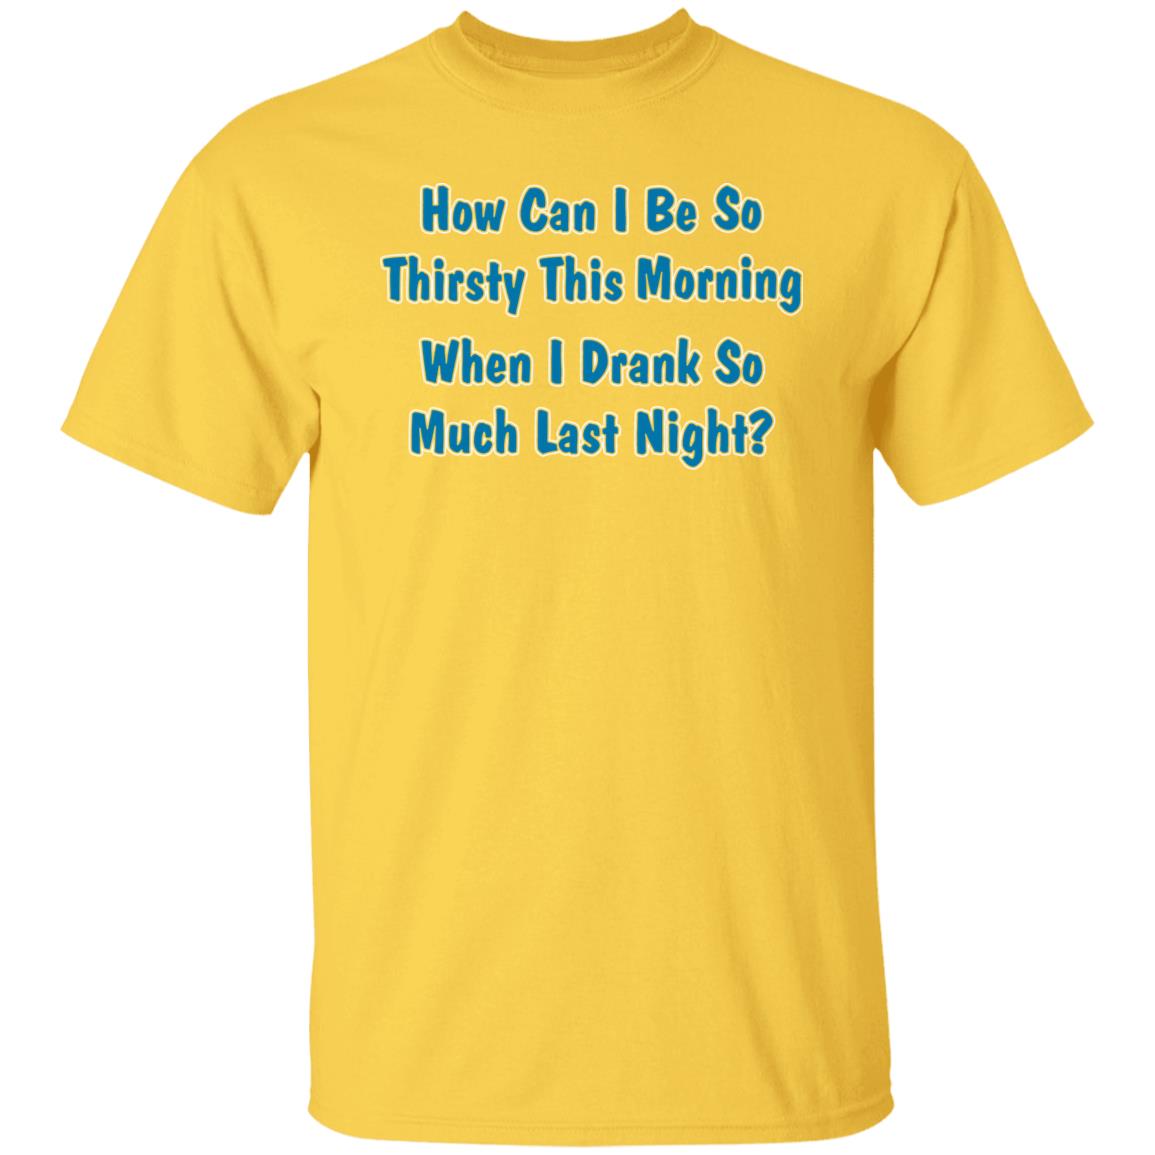 Khalid Thegreatkhalid How Can I Be So Thirsty This Morning When I Drank So Much Last Night Shirt